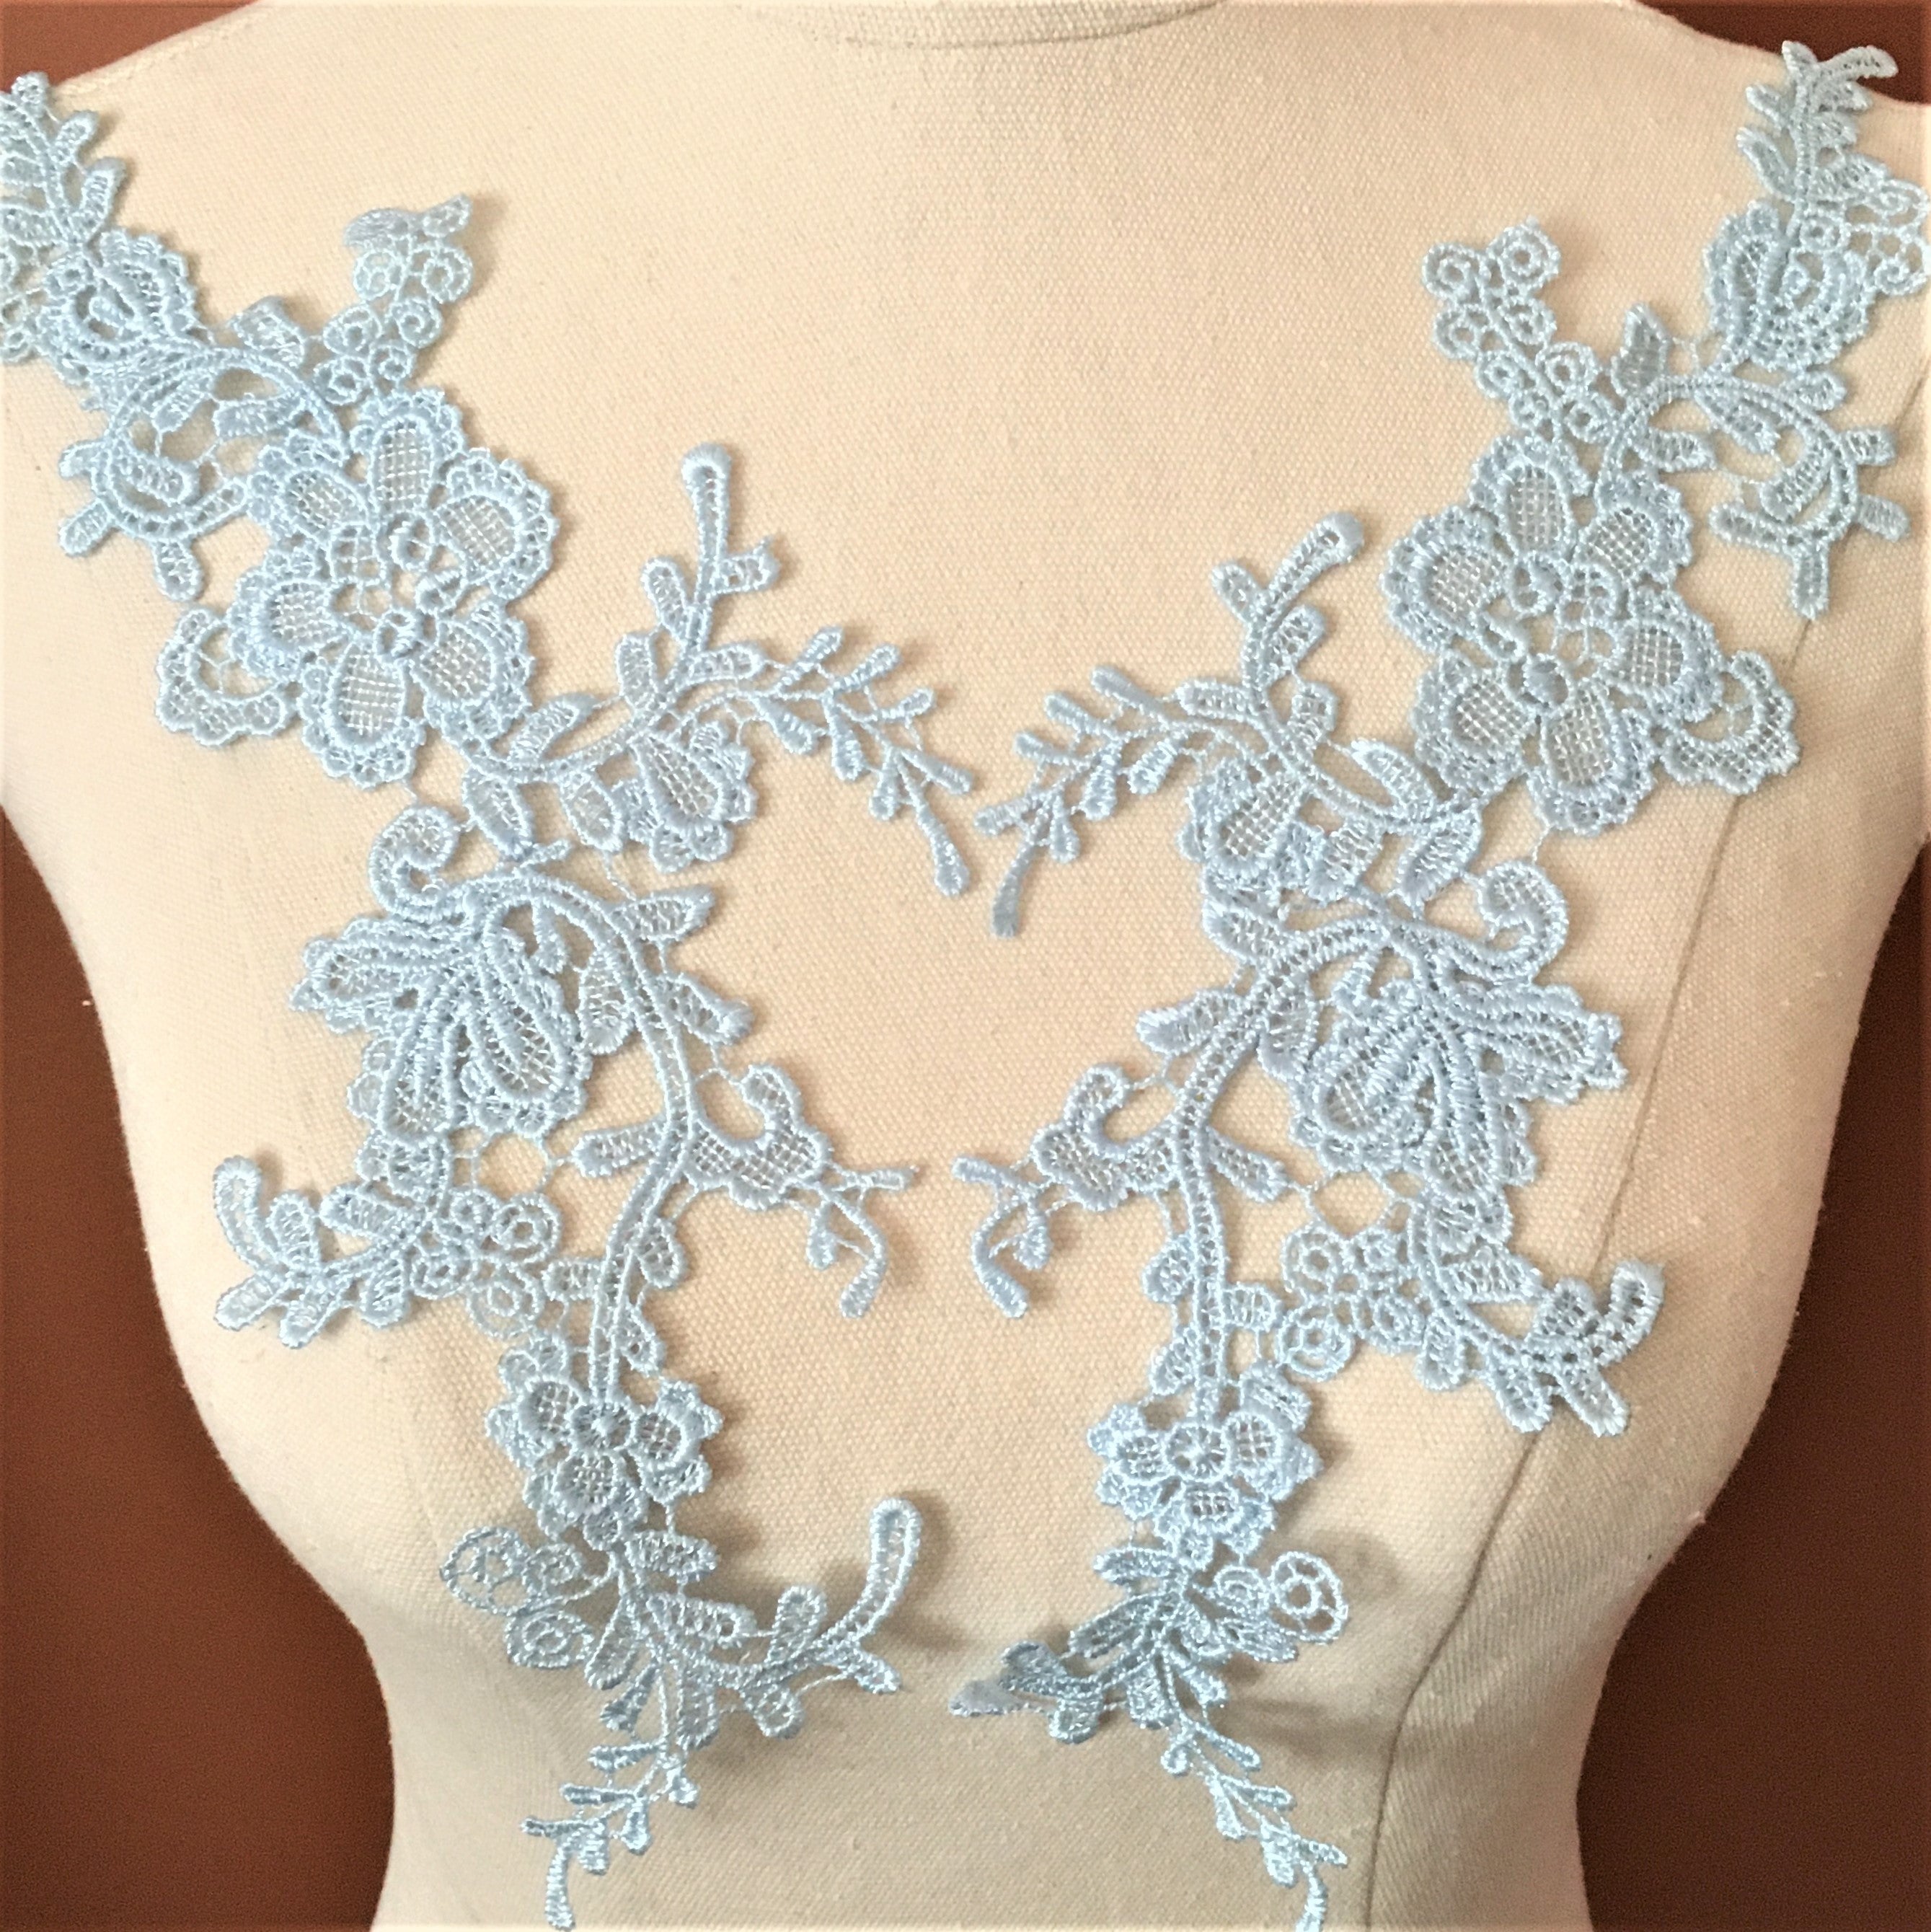 Finely embroidered pale blue applique pair. The applique is self embroidered without a backing net and is displayed on a mannequin.